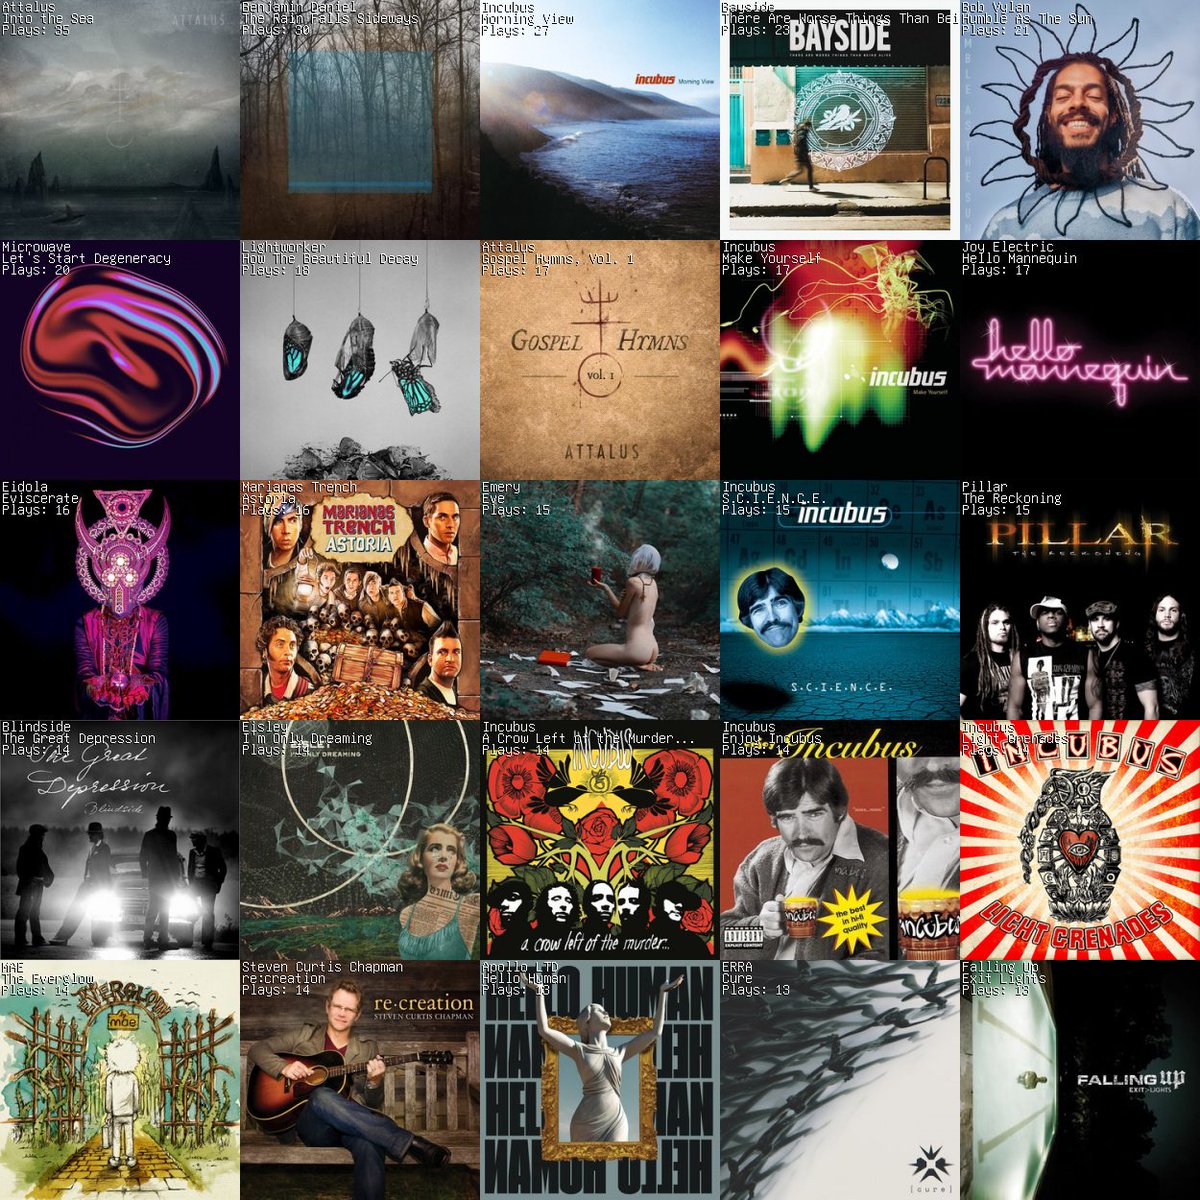 My music listening throughout April. I spent the first two weeks with a bunch of new releases, then spent the back half of April primarily with the discographies of Incubus, Pillar, and Marianas Trench.